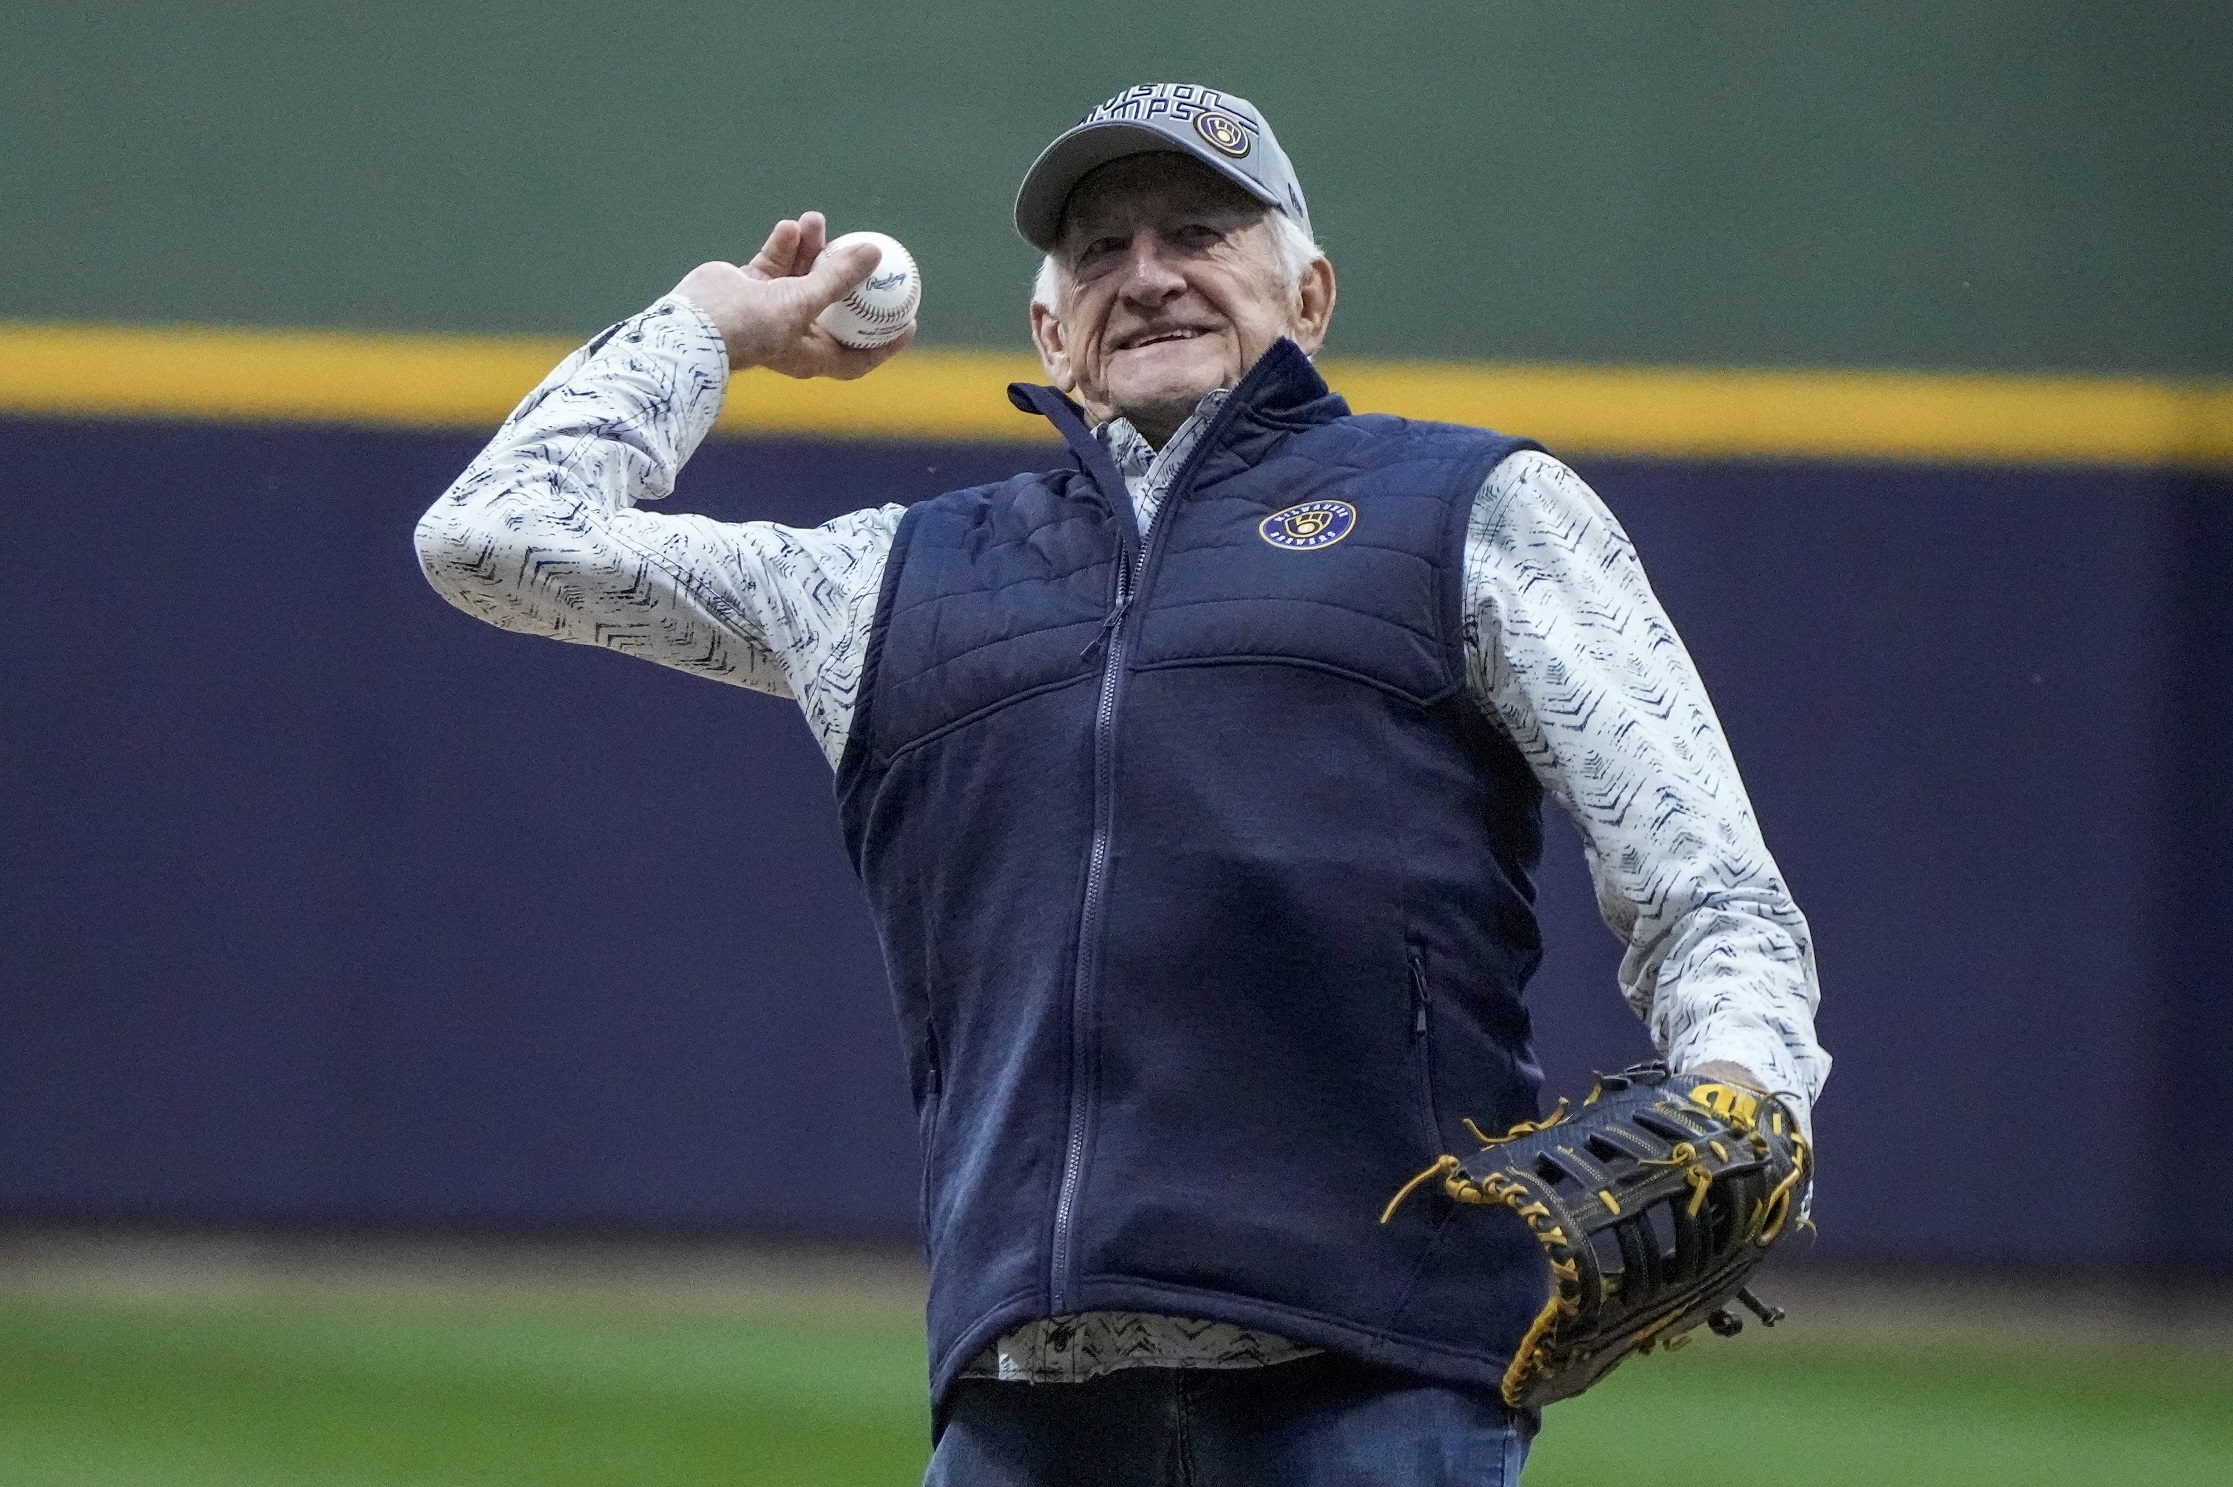 Bob Uecker, 90, expected to broadcast Brewers’ home-opener, workload the rest of season uncertain